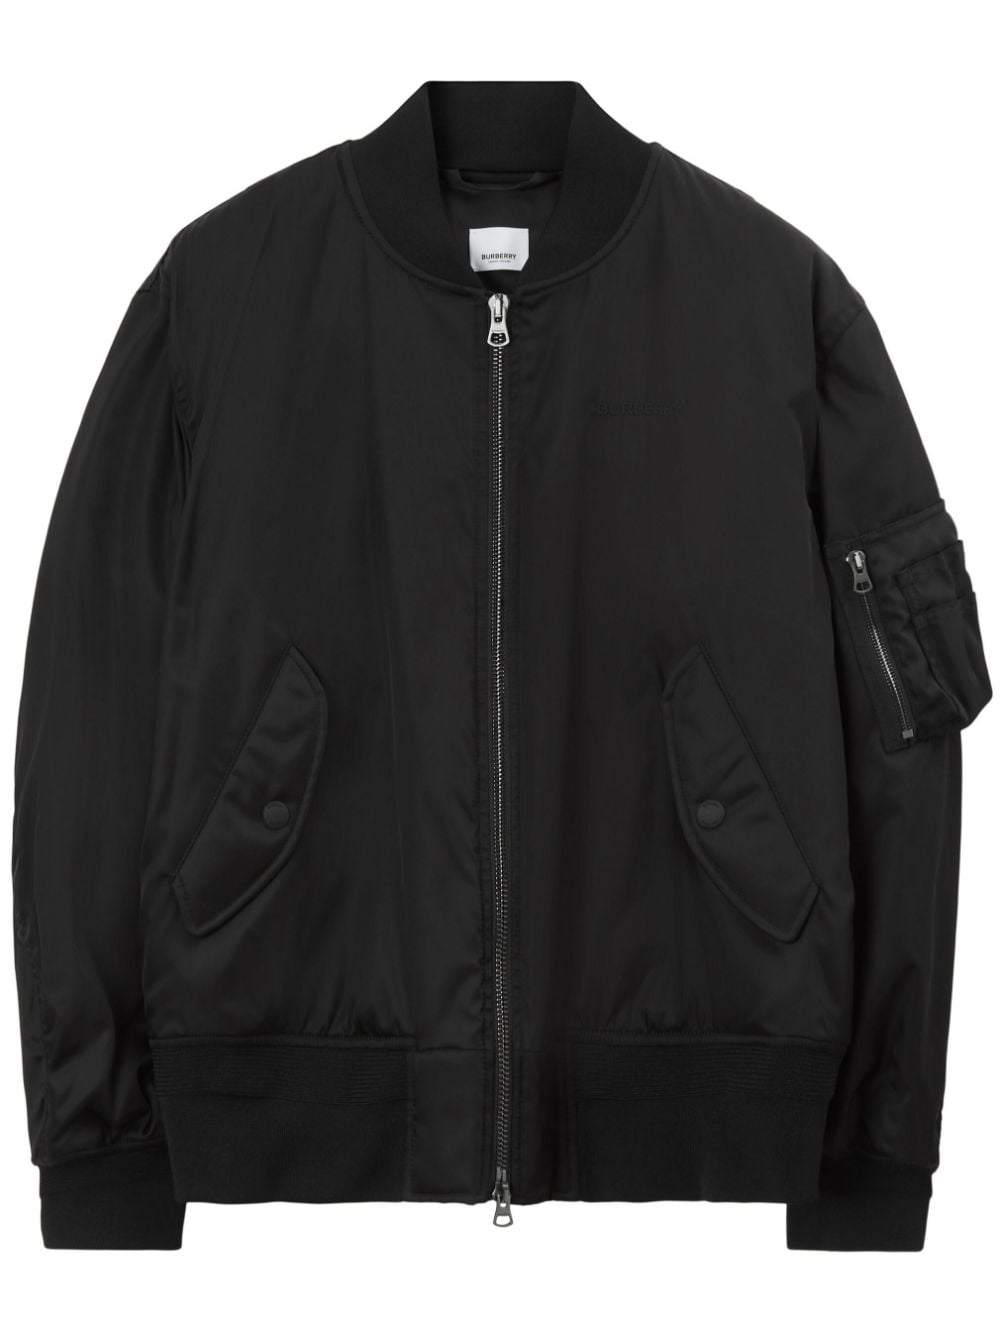 Burberry Chequered Crest bomber jacket - Black